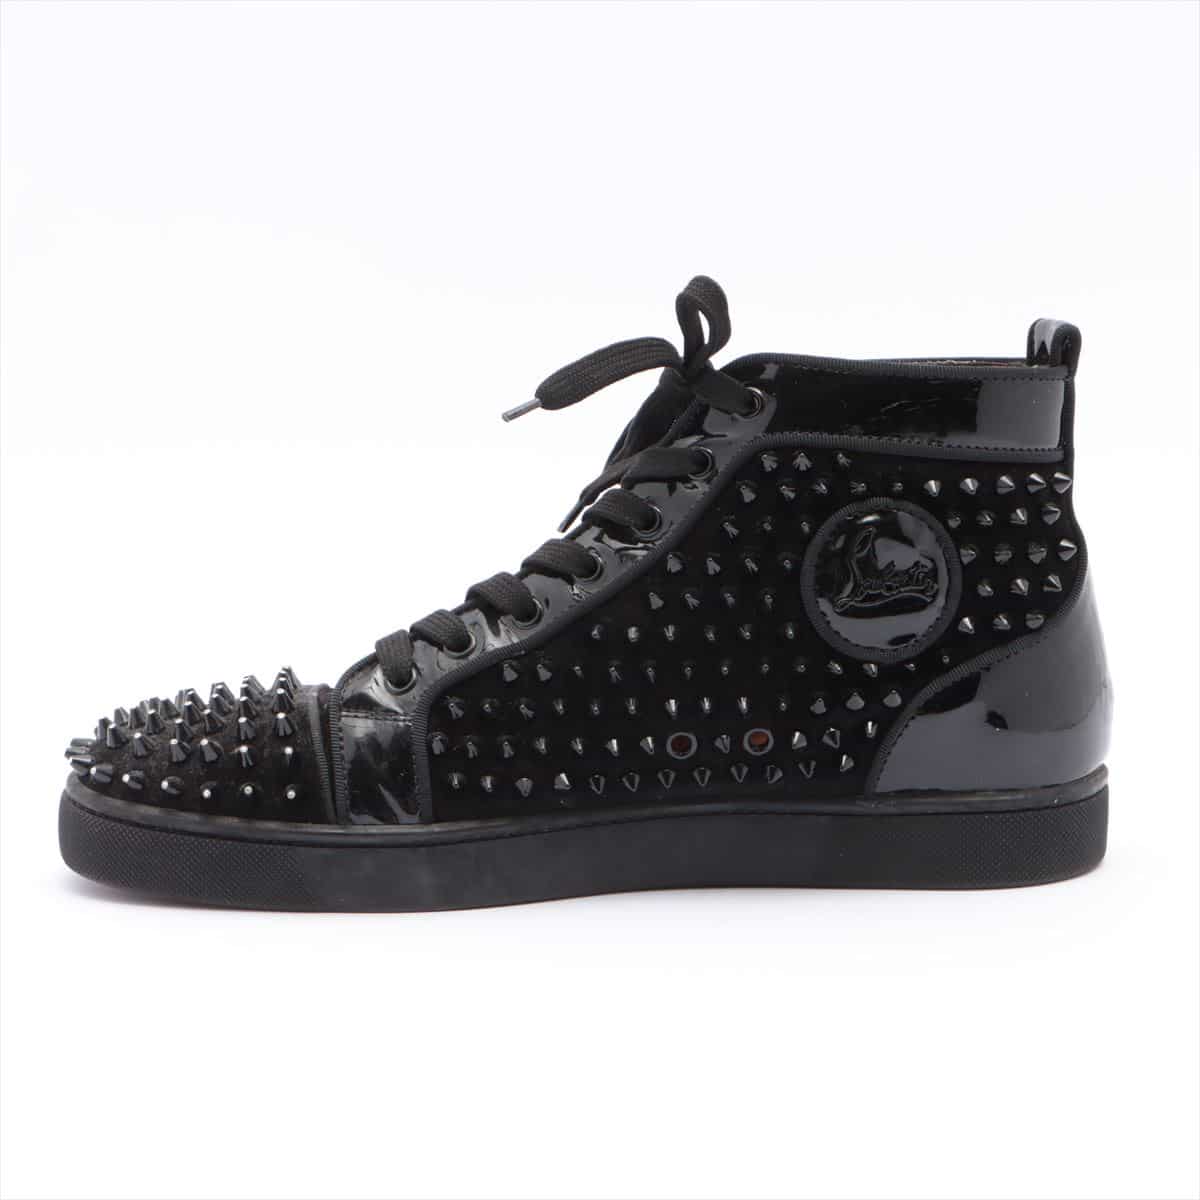 Christian Louboutin Suede High-top Sneakers 43 Men's Black Studs